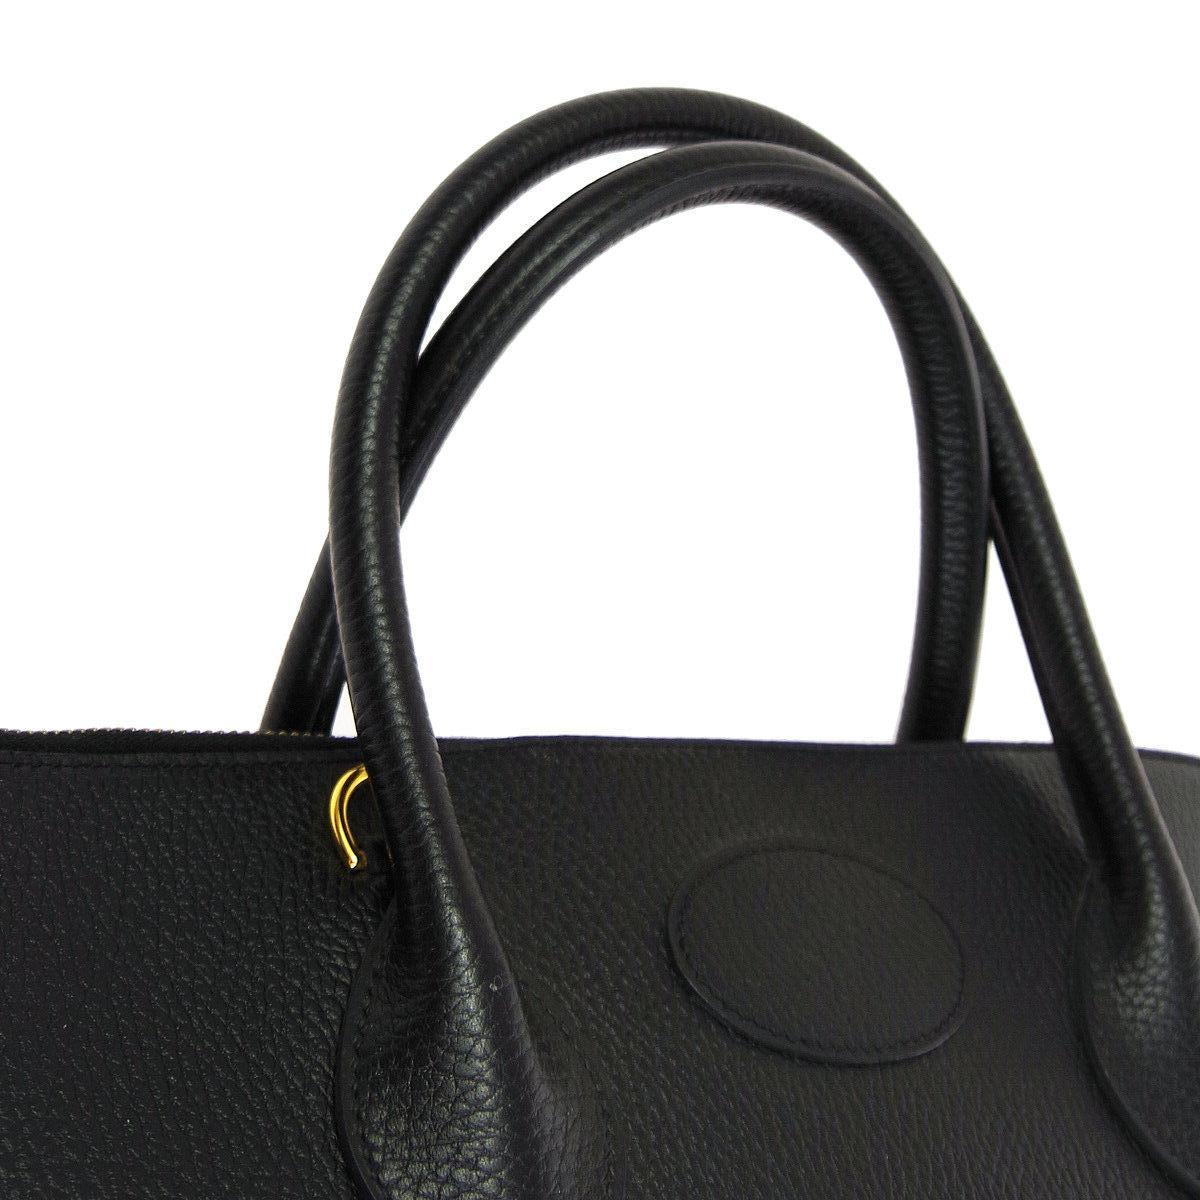 Hermes Black Bolide Leather Gold Large Travel Carryall Top Handle Satchel Tote Bag

Leather
Gold tone hardware 
Zipper closure 
Leather lining
Date code present
Made in France
Handle drop 4